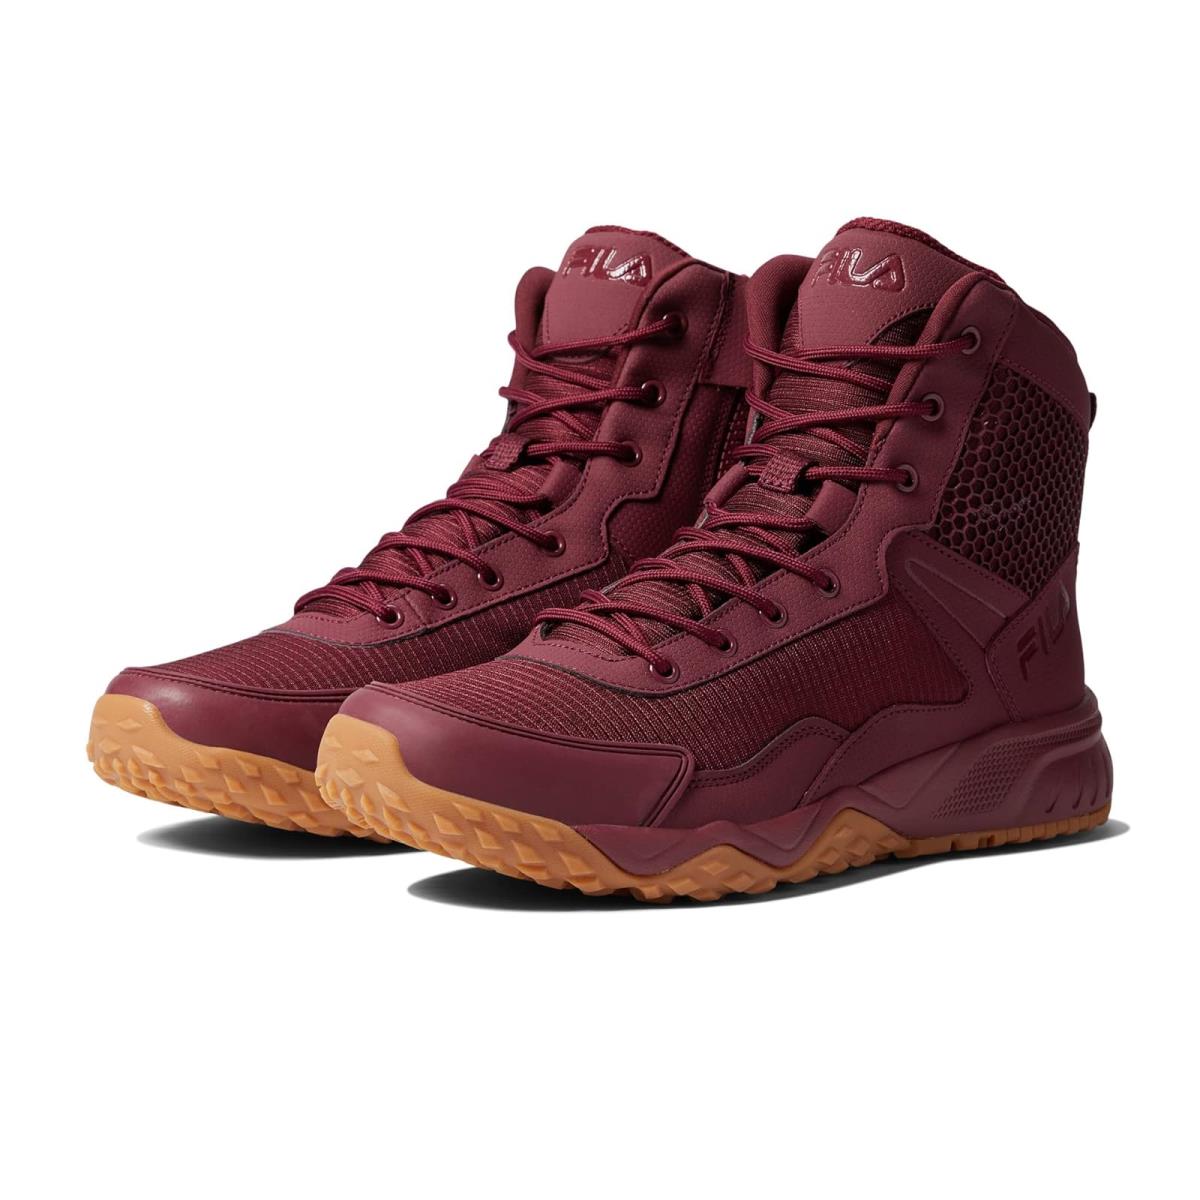 Man`s Sneakers Athletic Shoes Fila Chastizer Tawny Port/Tawny Port/Gum